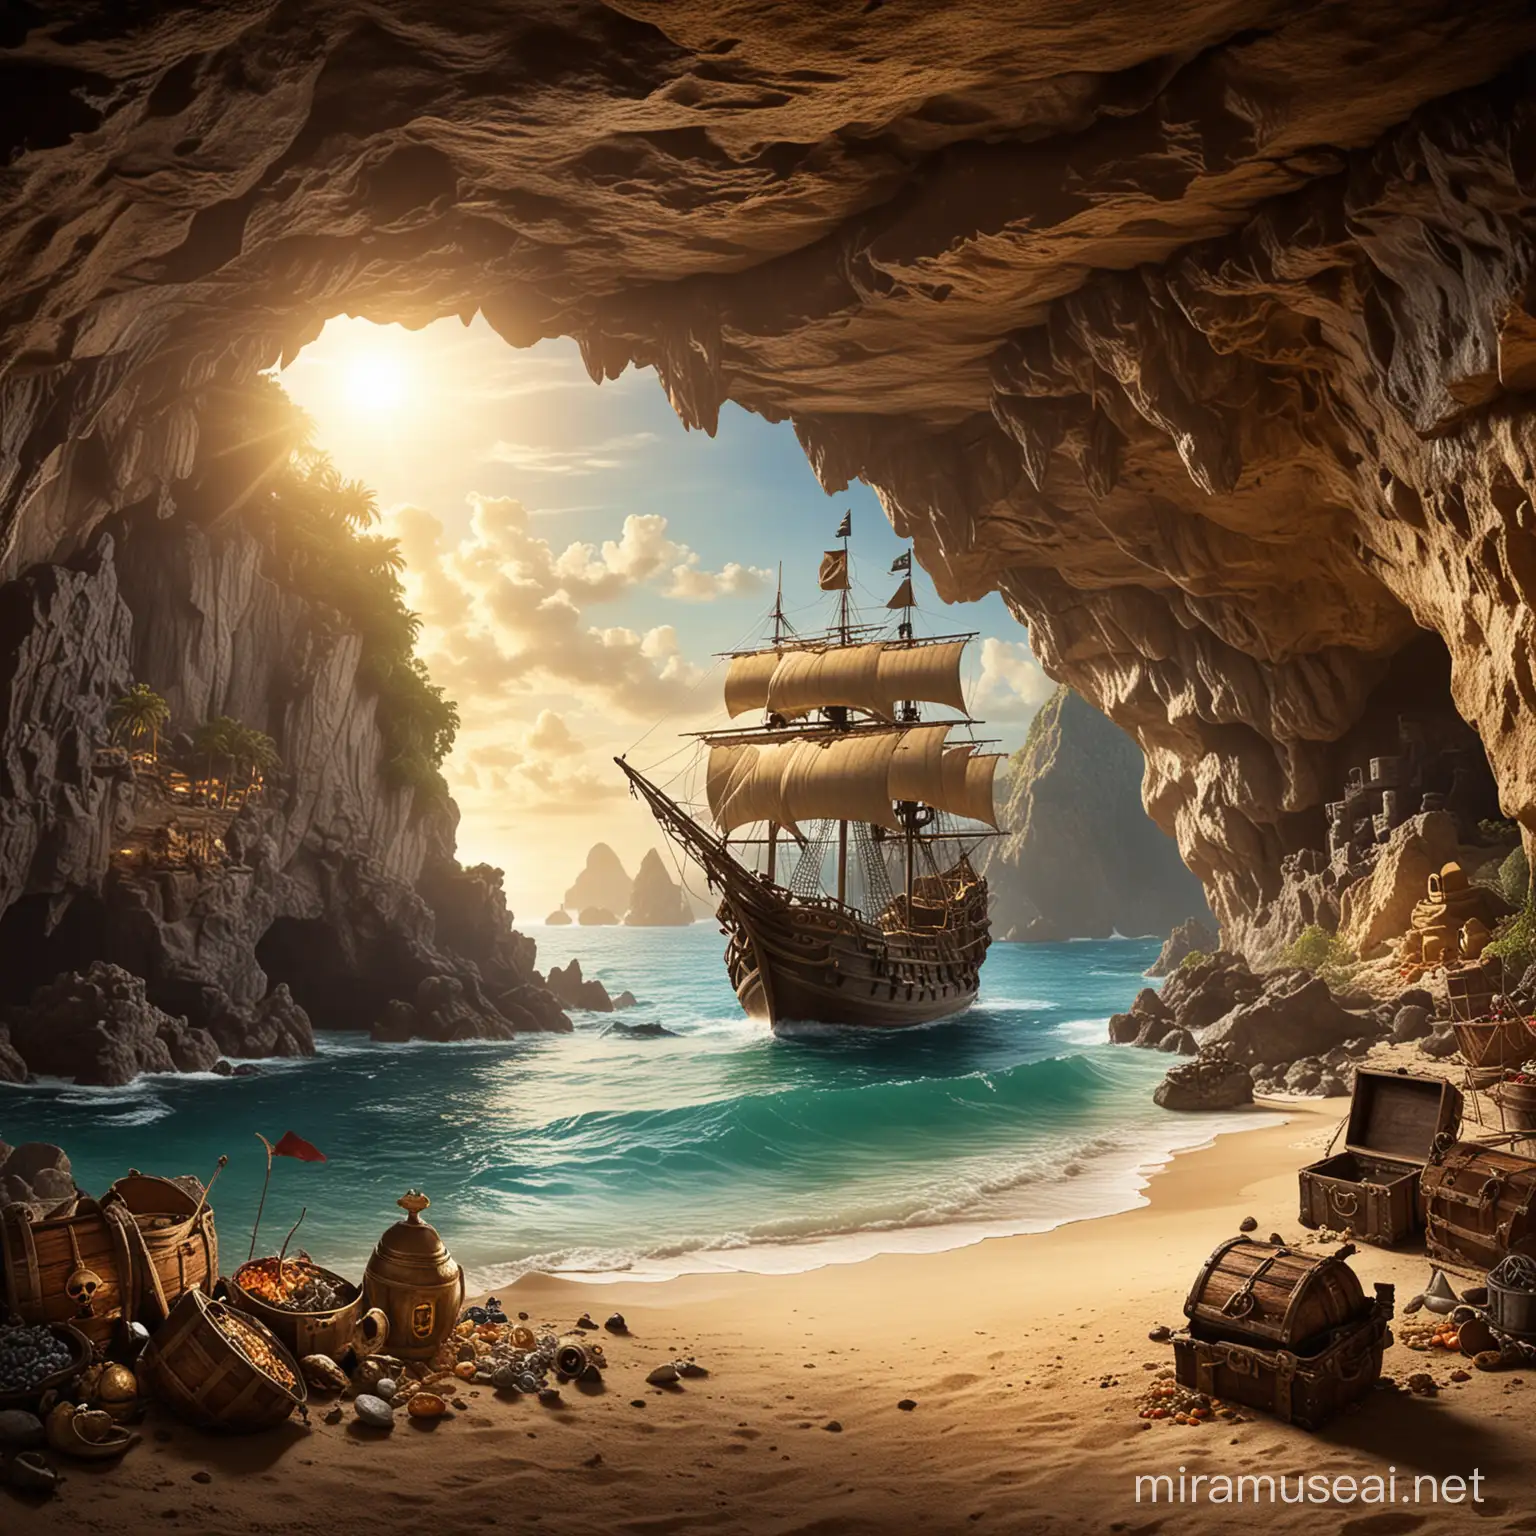 Exploring Pirate Treasure in a Mysterious Cave with a Distant Pirate Ship